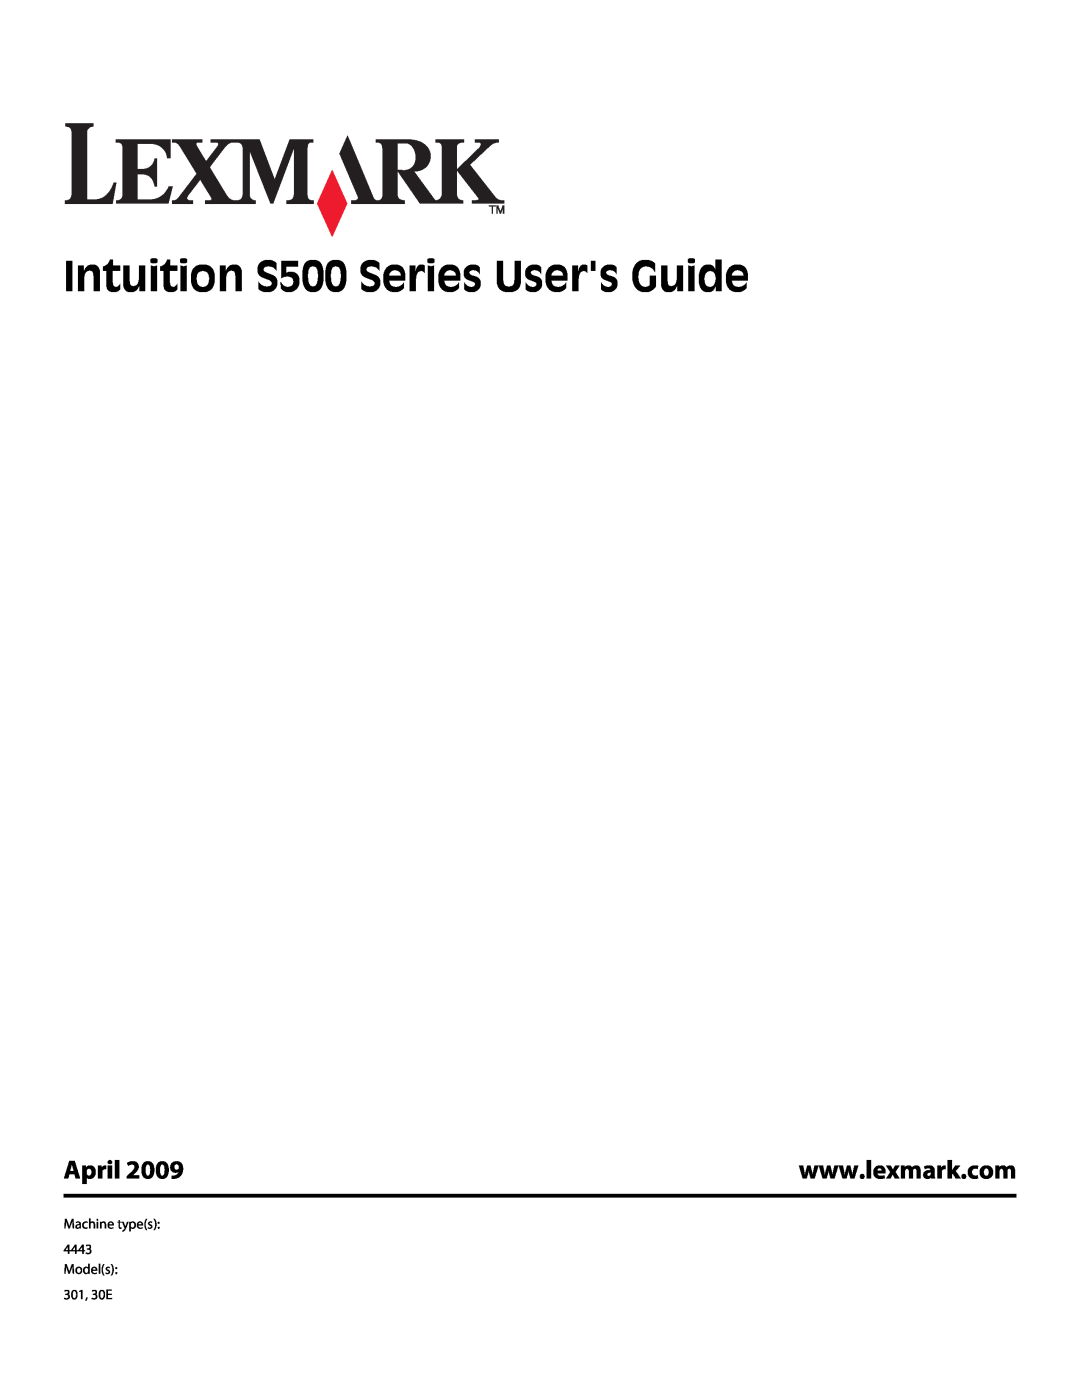 Lexmark manual Intuition S500 Series Users Guide, April, Machine types 4443 Models 301, 30E 